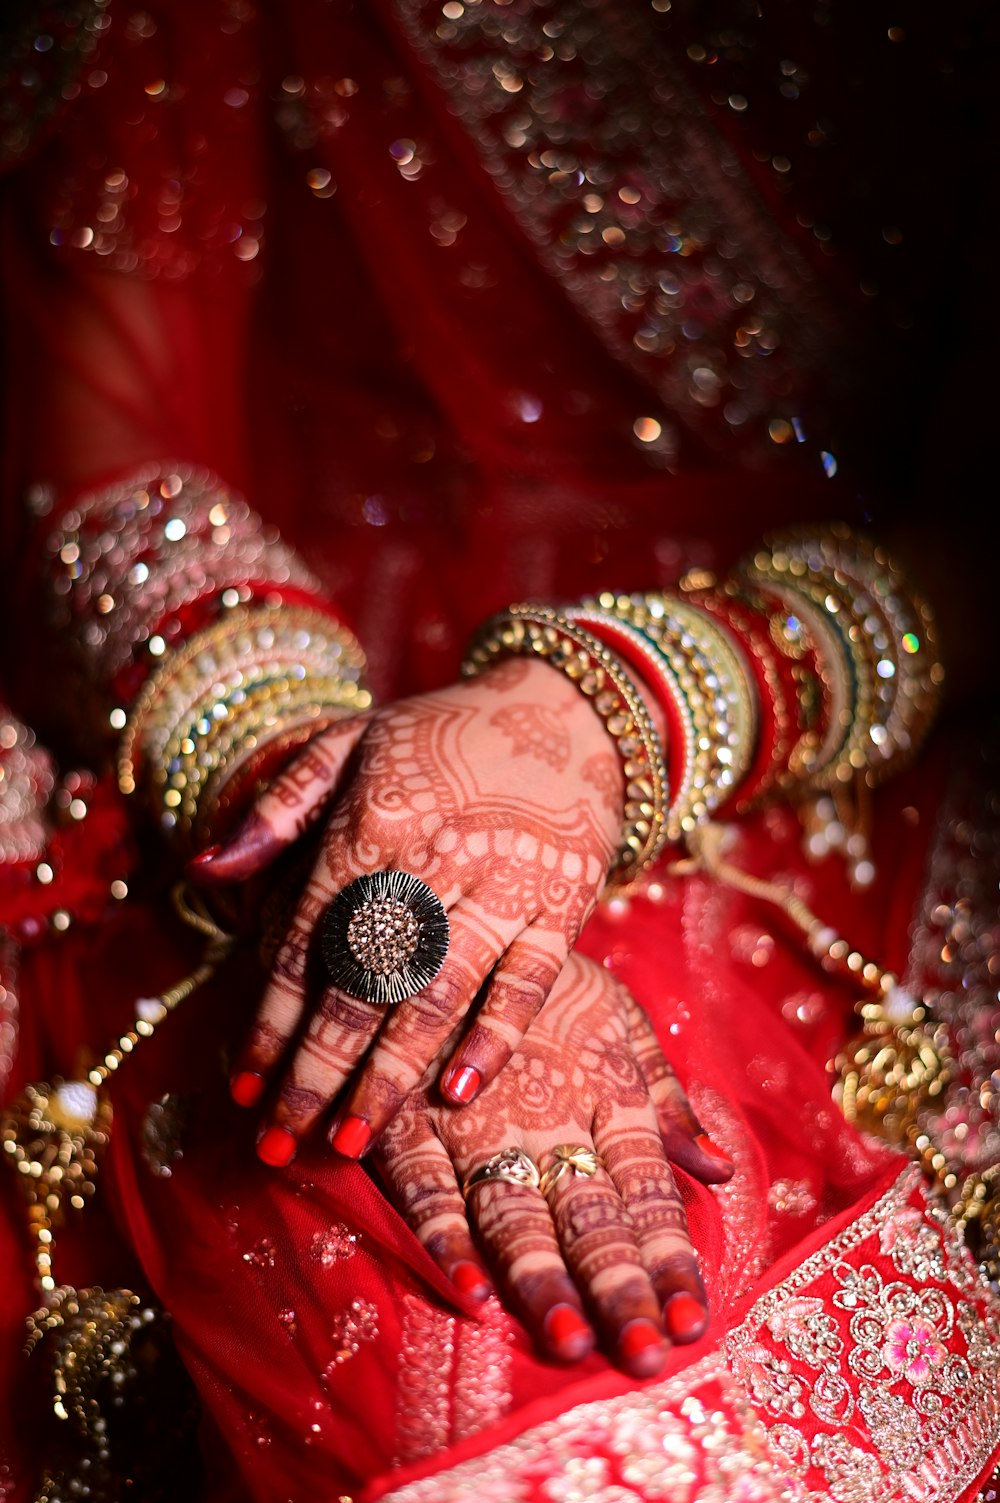 a close up of a woman's hands with hennap